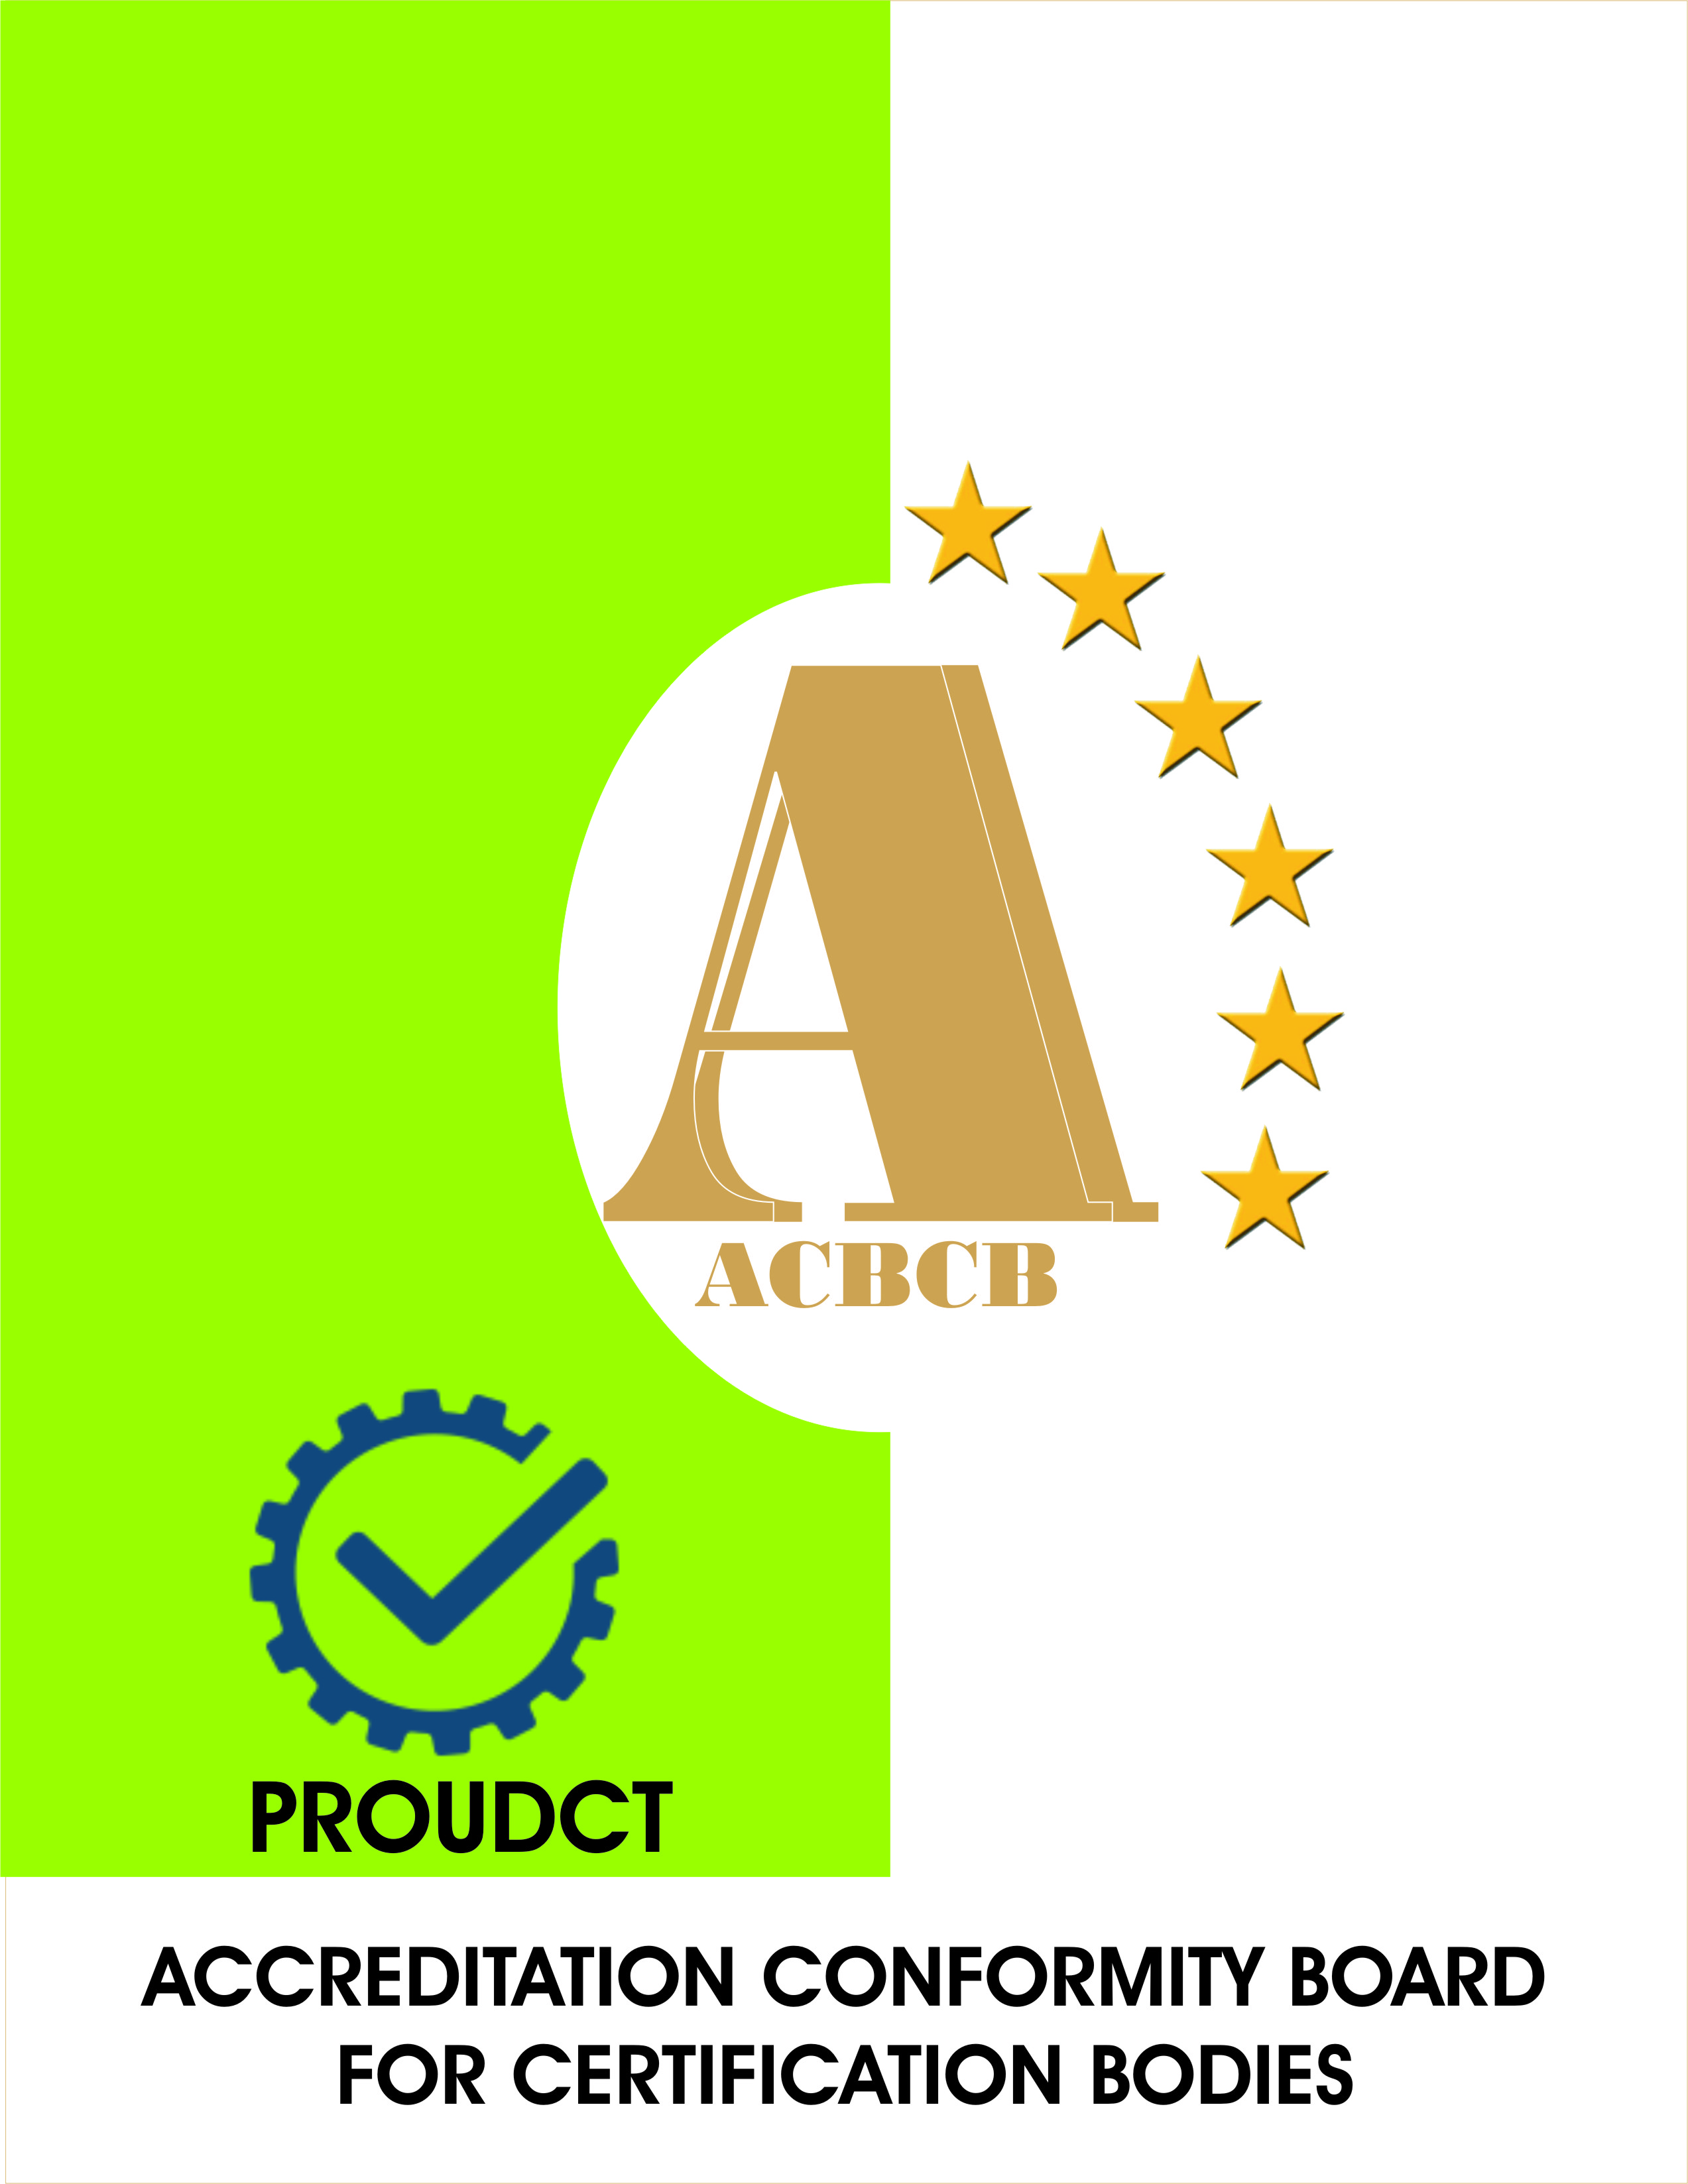 ACBCB PRODUCT CERTIFICATION